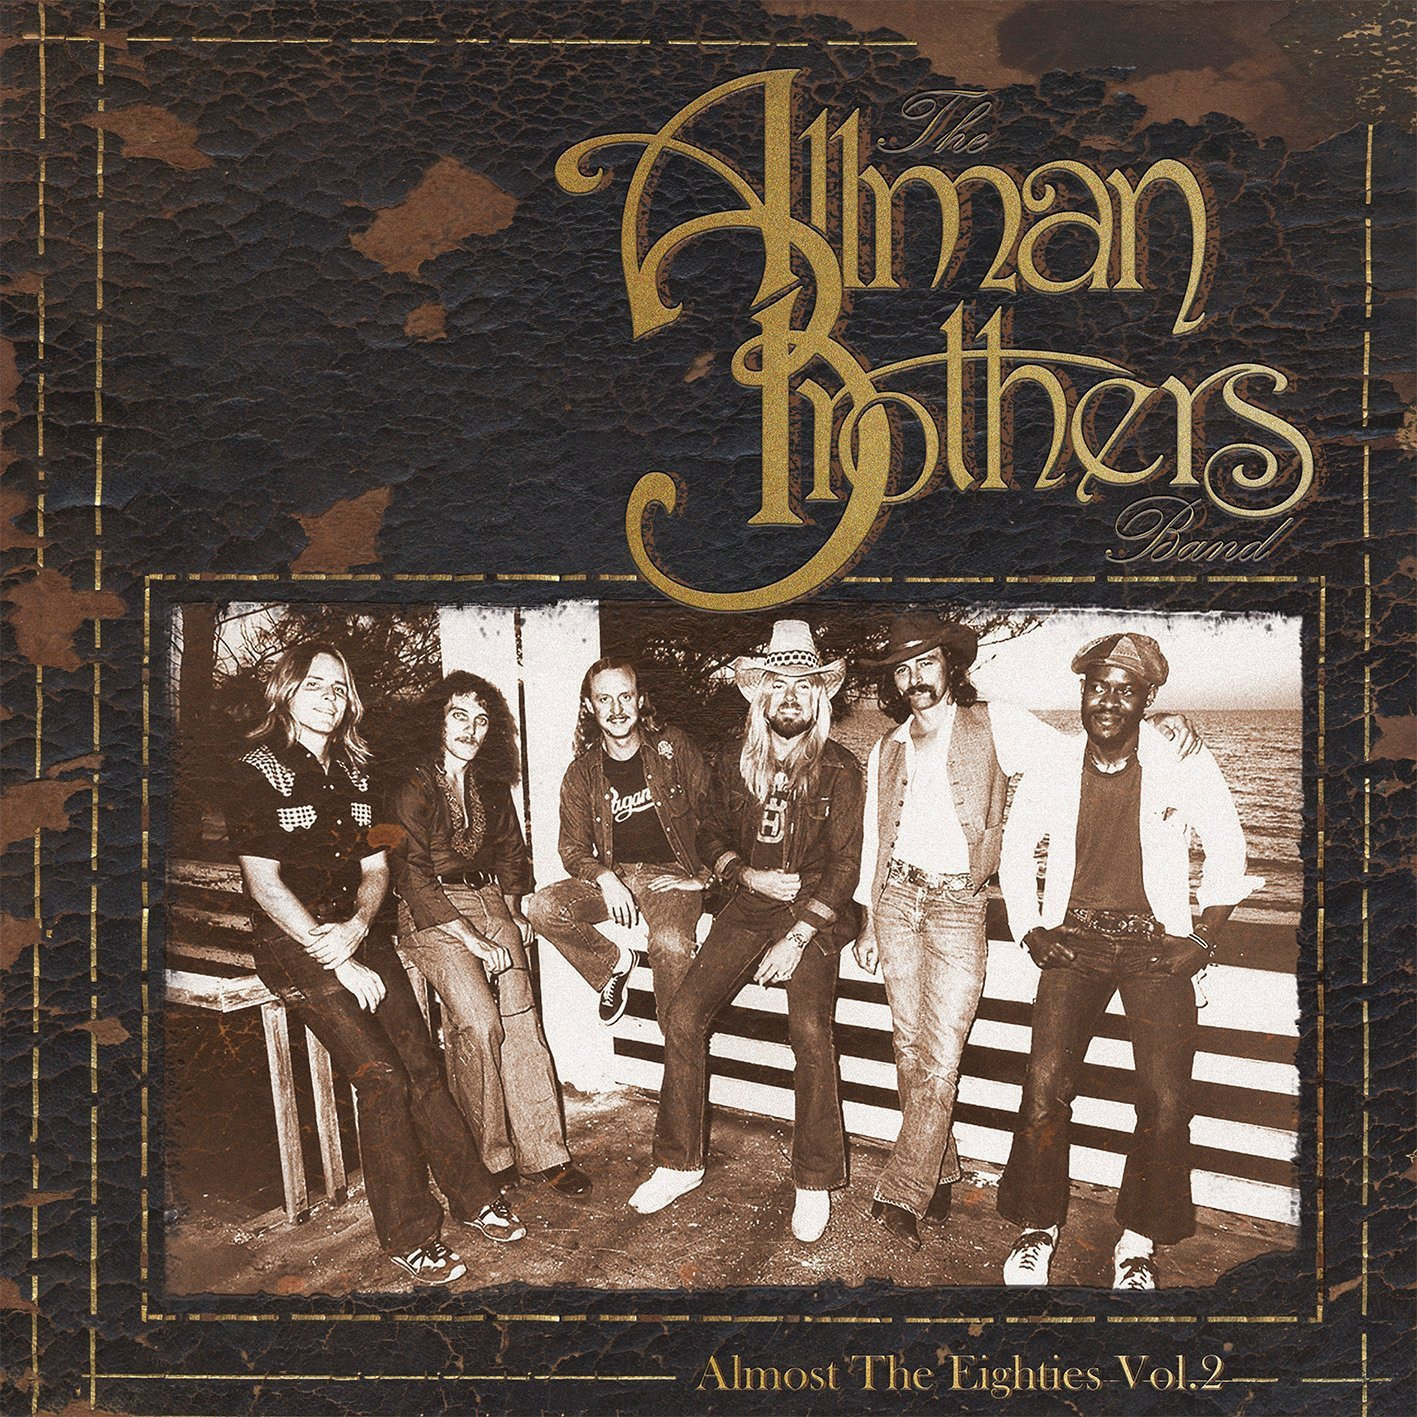 Disco de vinilo The Allman Brothers Band - Almost The Eighties Vol. 2 (2 LP)